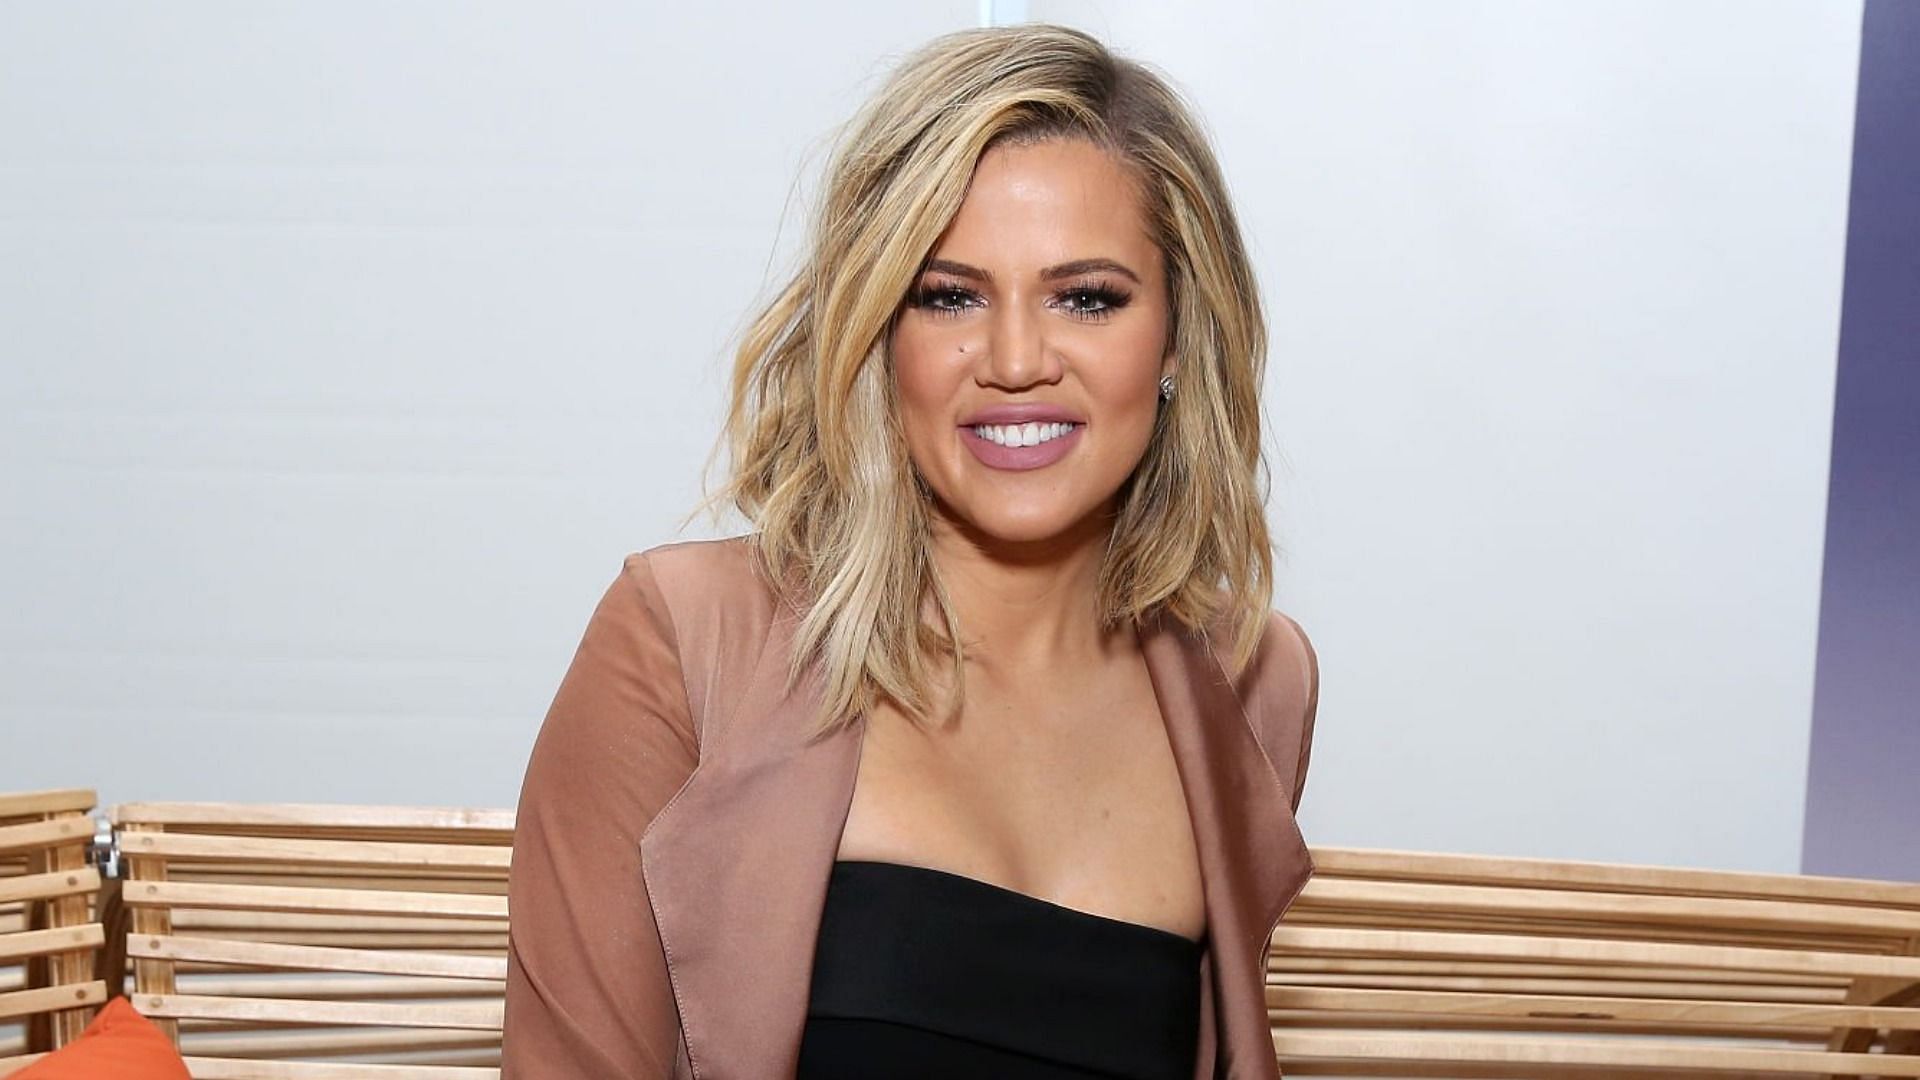 The Kardashian episode 2 showed Khloe Kardashian dealing with anxiety before filming an interview with James Corden (Image via Cindy Ord/Getty Images)